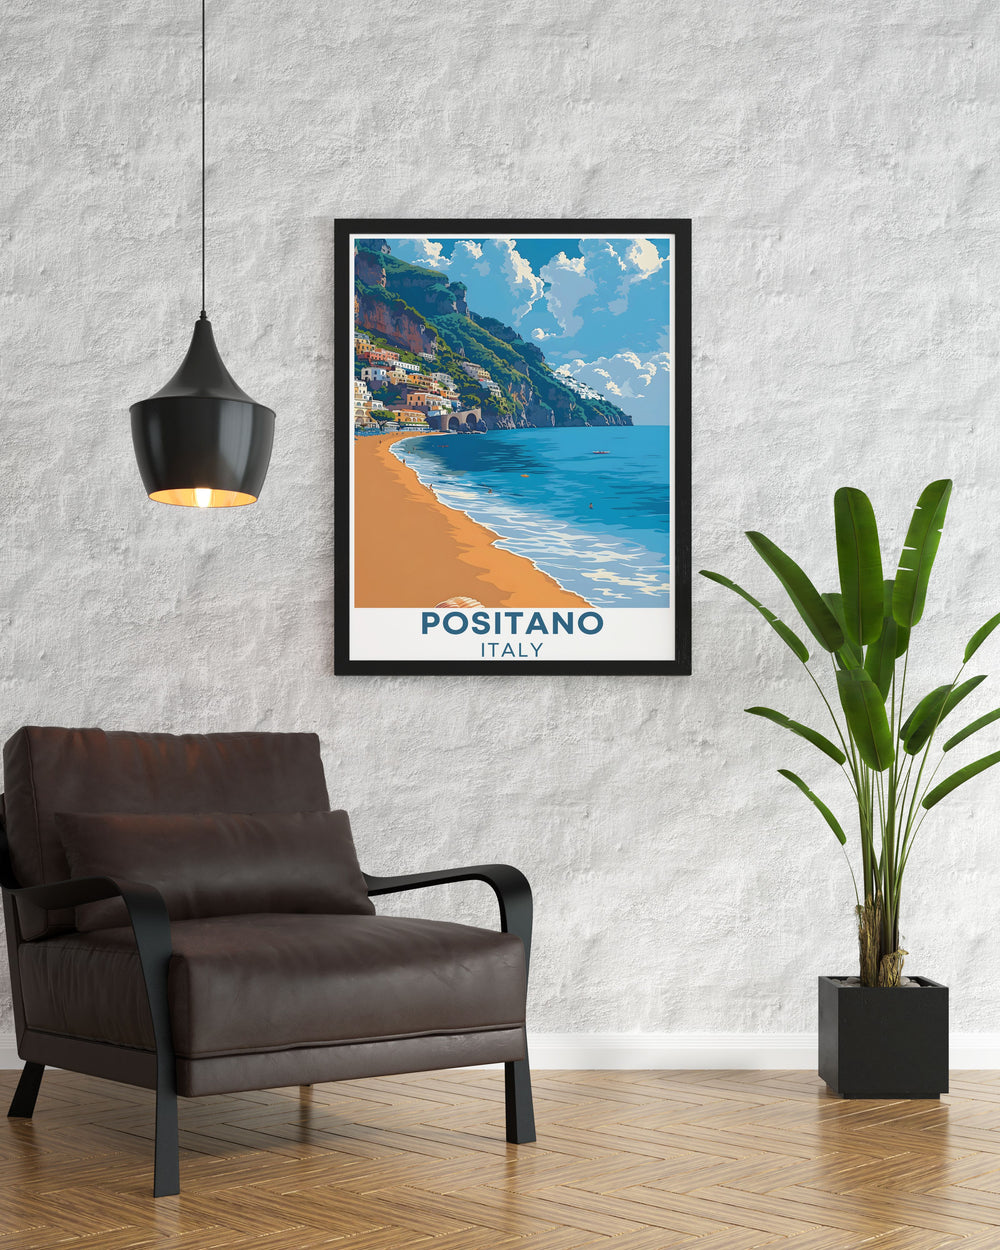 Beautiful Spiaggia Grande Travel poster showcasing the iconic Positano beach with colorful Mediterranean landscapes an ideal addition to any wall art collection perfect for adding charm and warmth to home decor and a lovely reminder of the Amalfi Coast